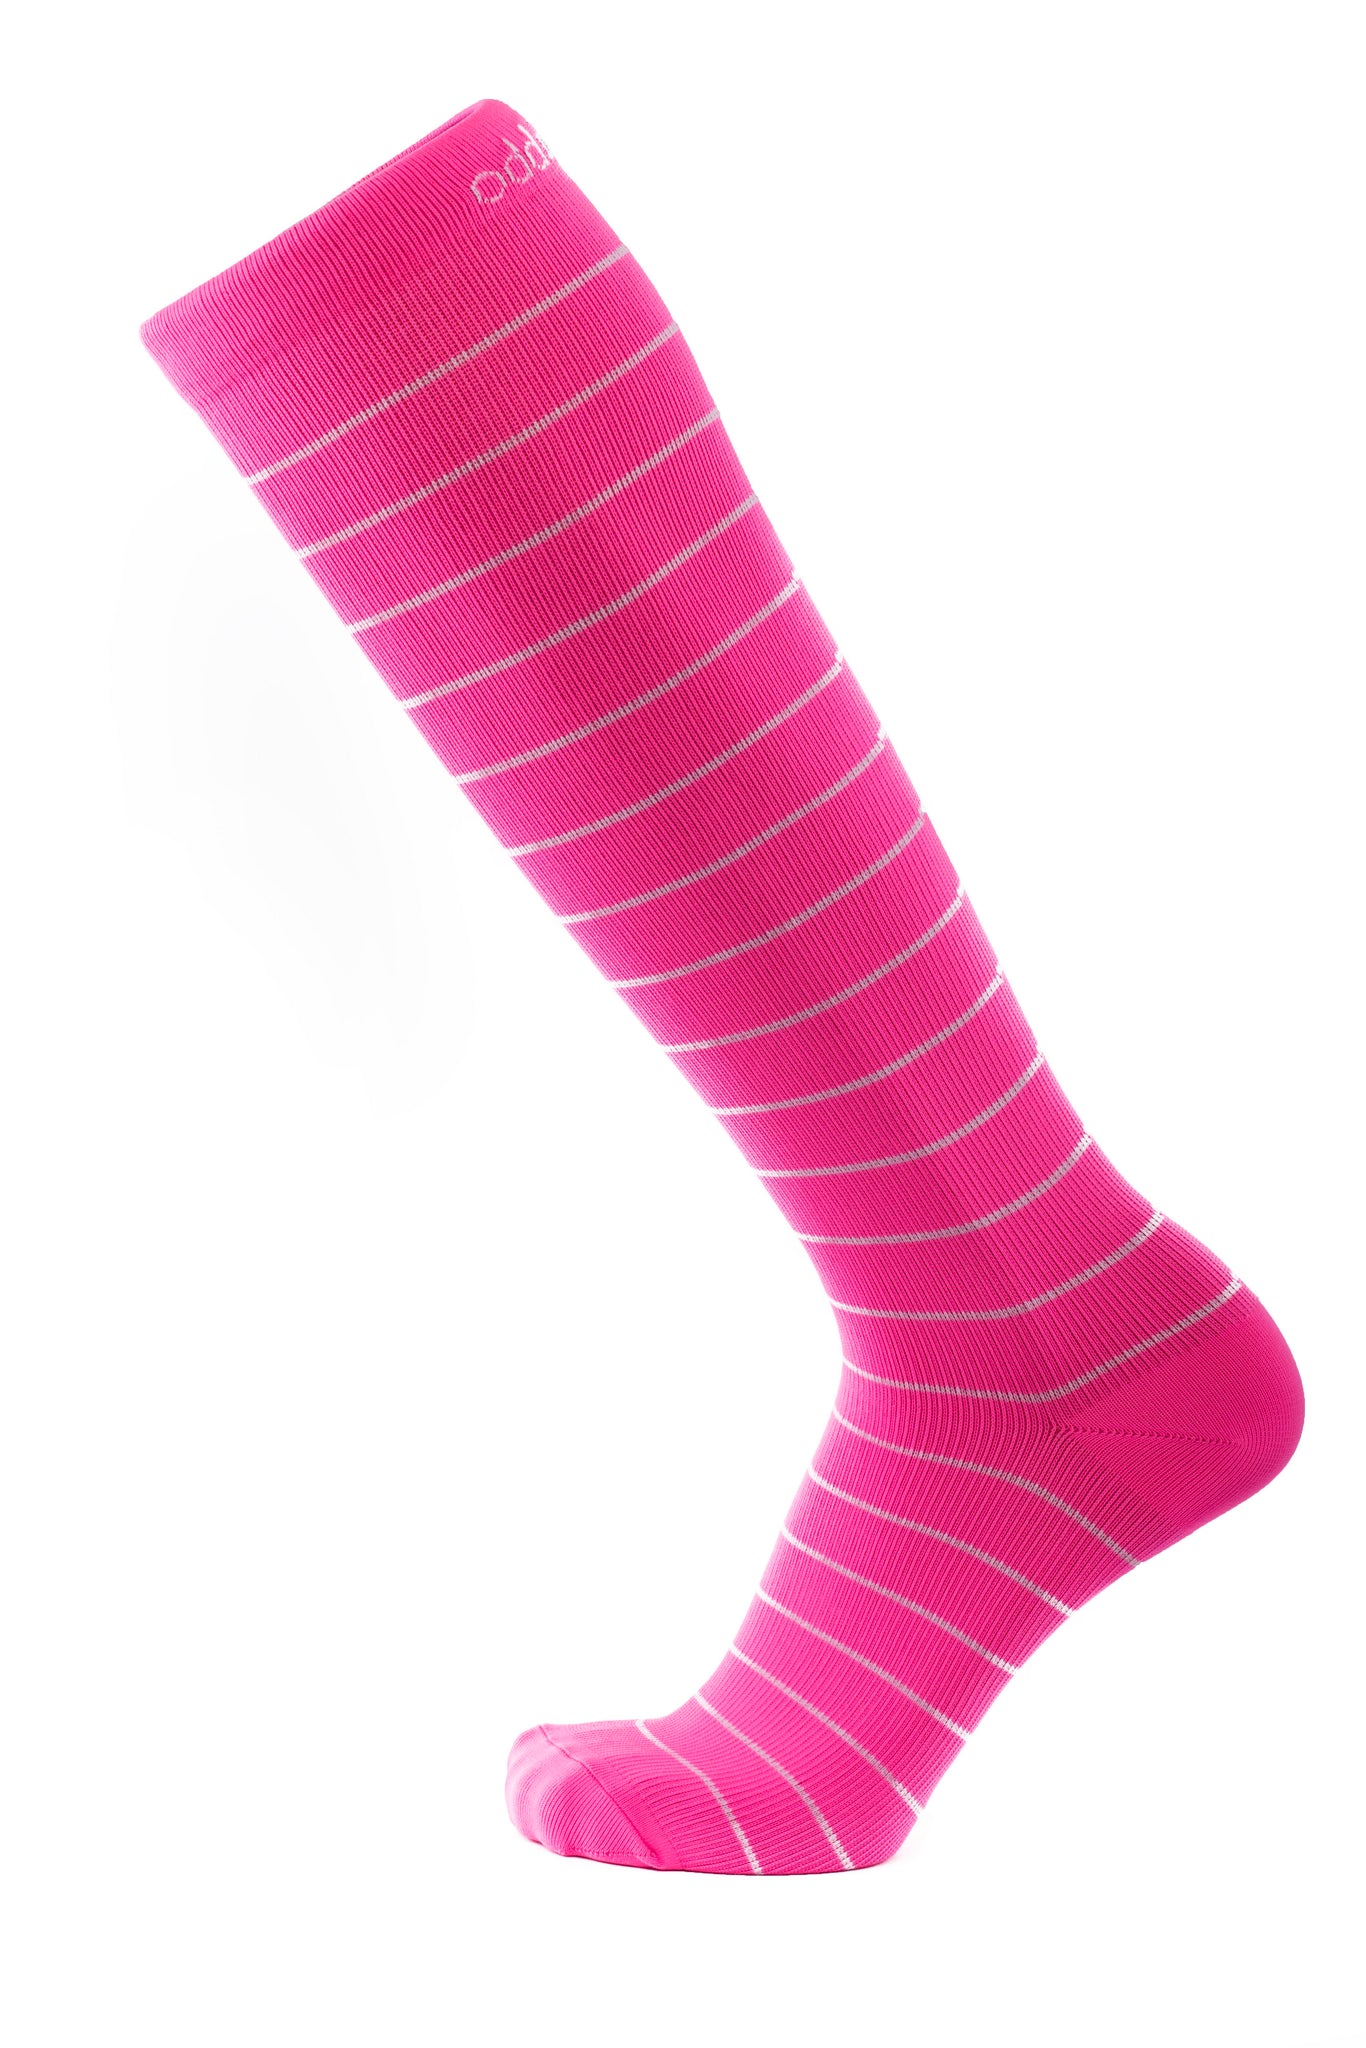 Neon is Not Just for Raves: The Benefits of Wearing Neon Compression Socks